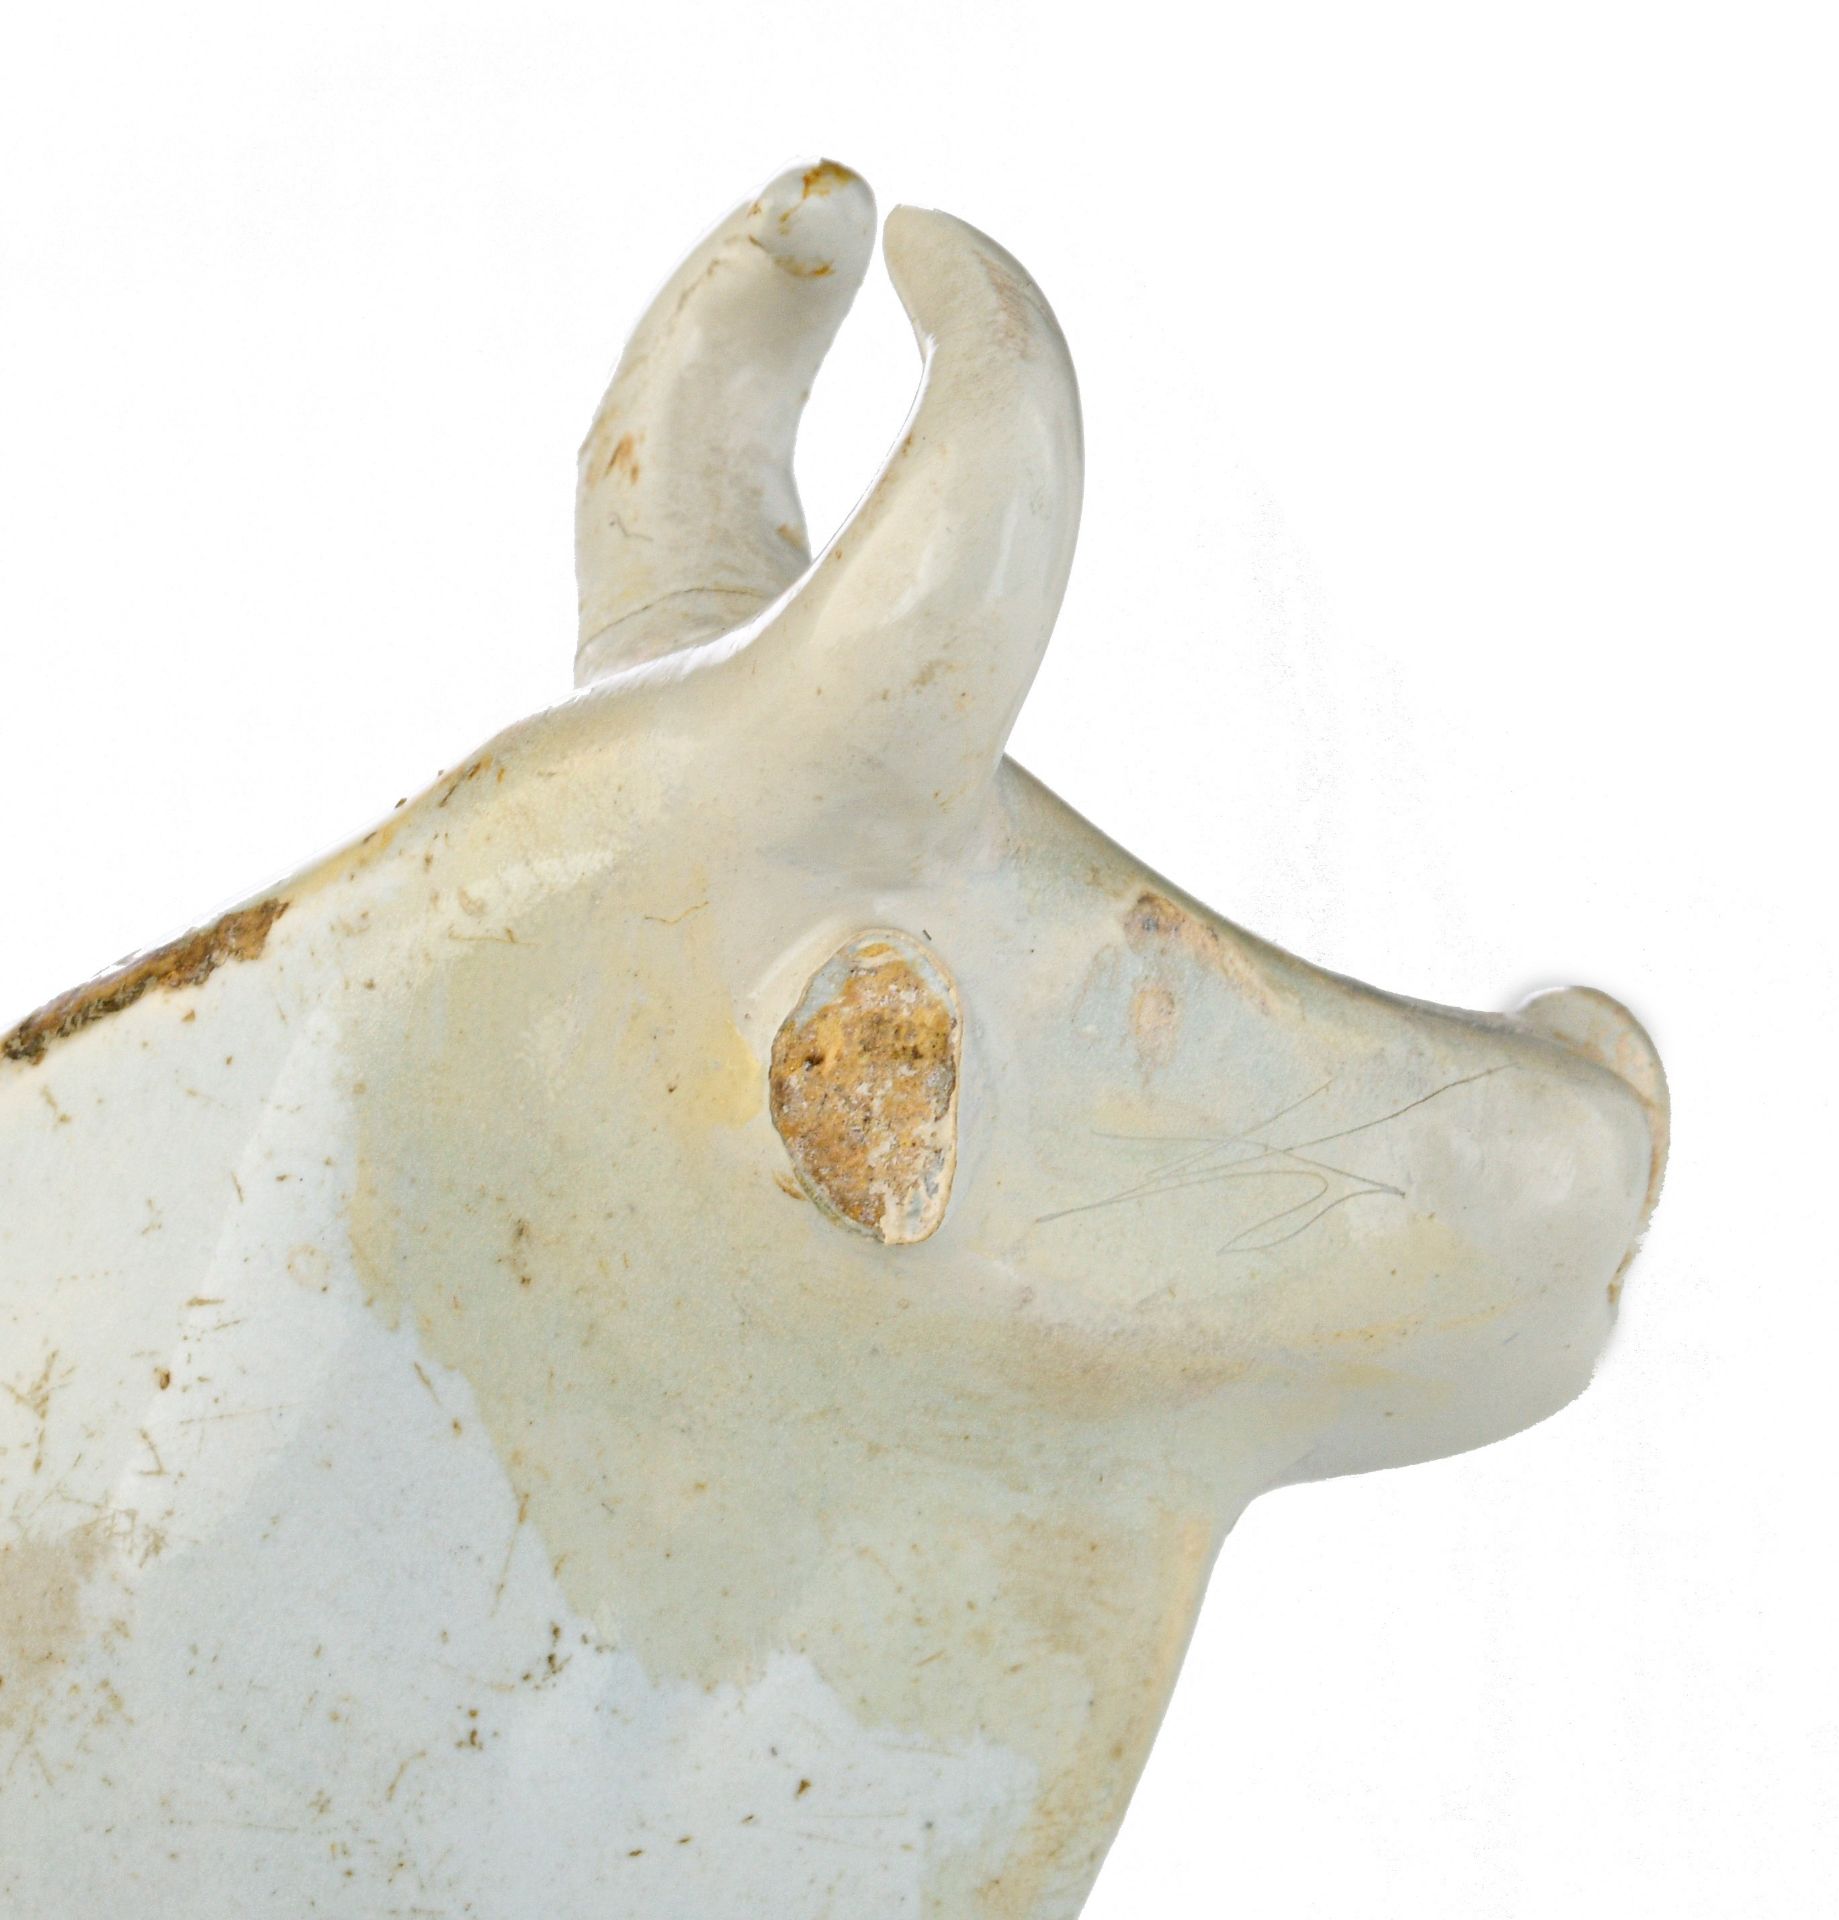 (BIDDING ONLY ON CARLOBONTE.BE) A rare pair of white Delft figures of cows, 18thC, marked Geertruy V - Image 16 of 16